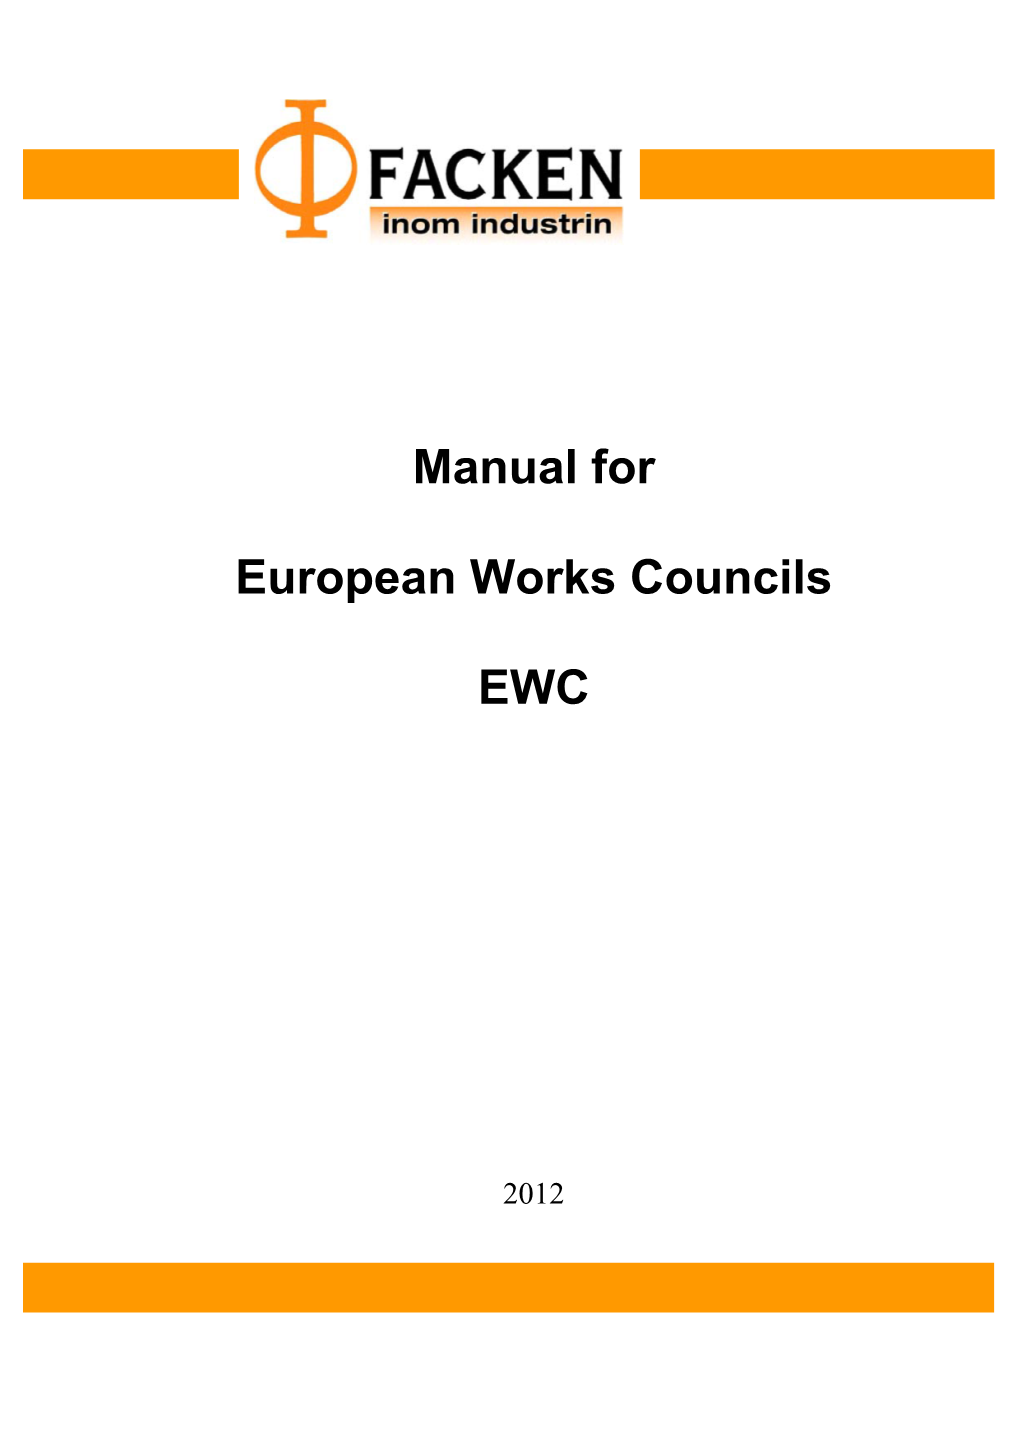 Manual for European Works Councils